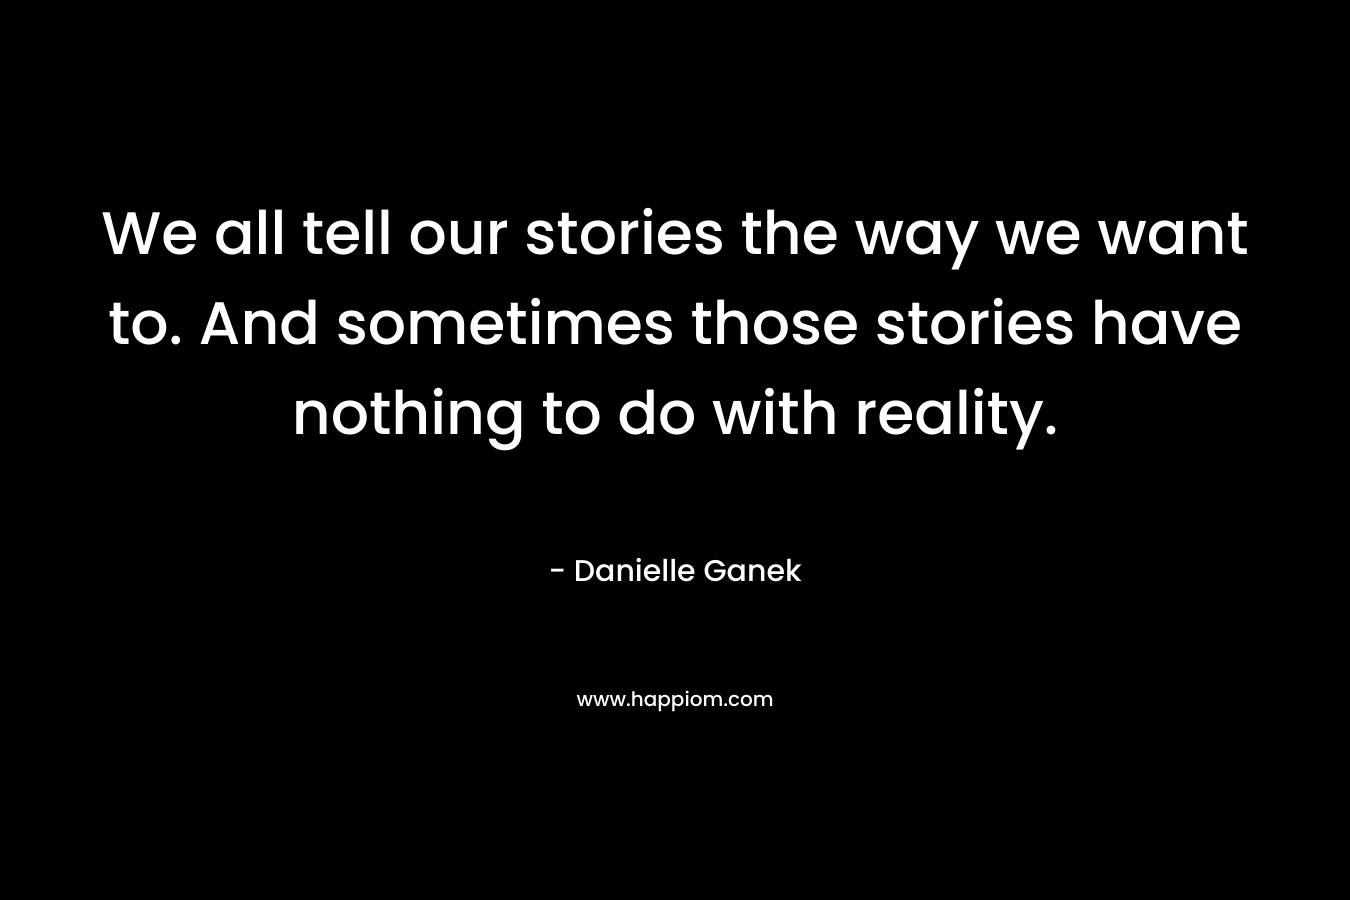 We all tell our stories the way we want to. And sometimes those stories have nothing to do with reality. – Danielle Ganek